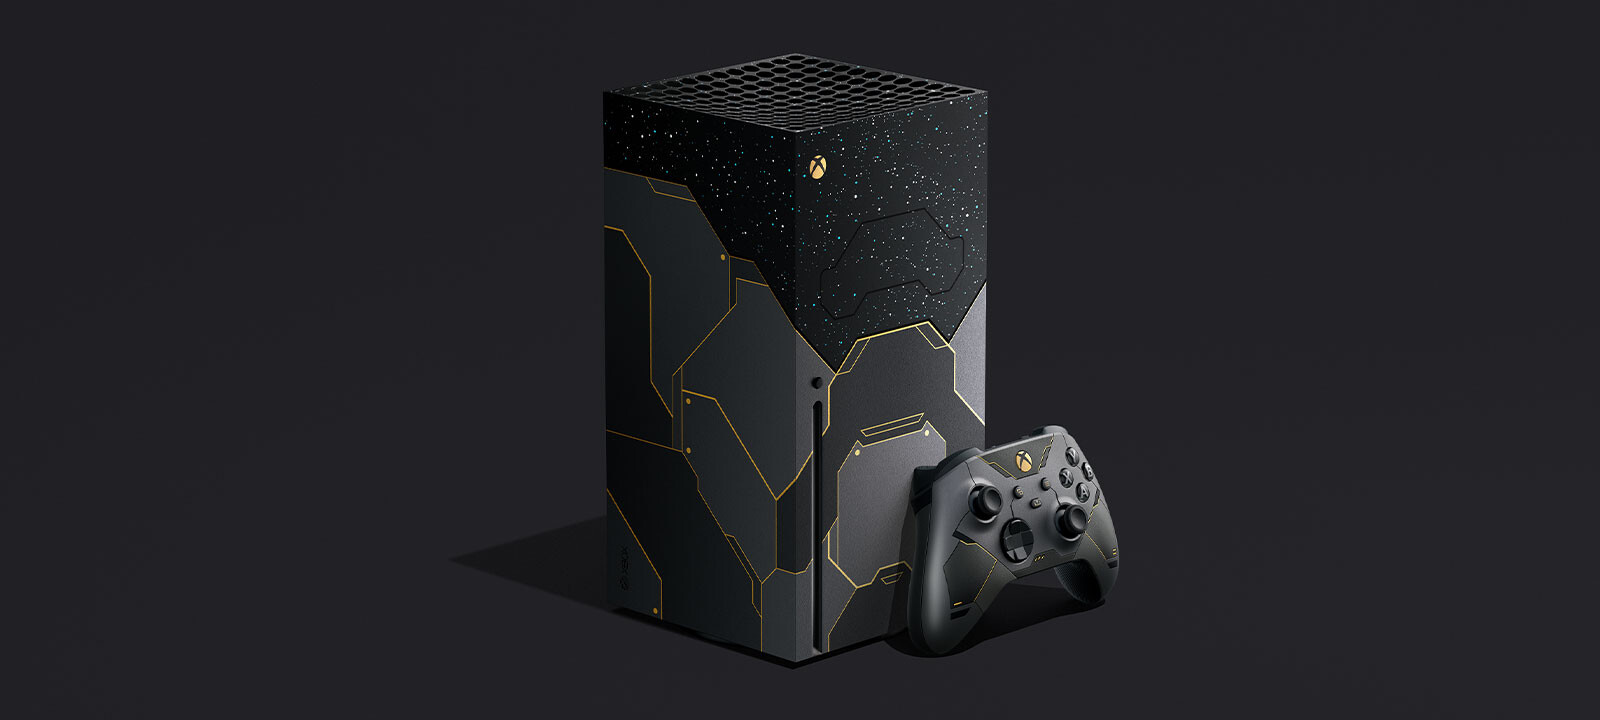 Halo Infinite Limited Edition Xbox Series X Console Announced And Falls Prey To Scalpers Techpowerup